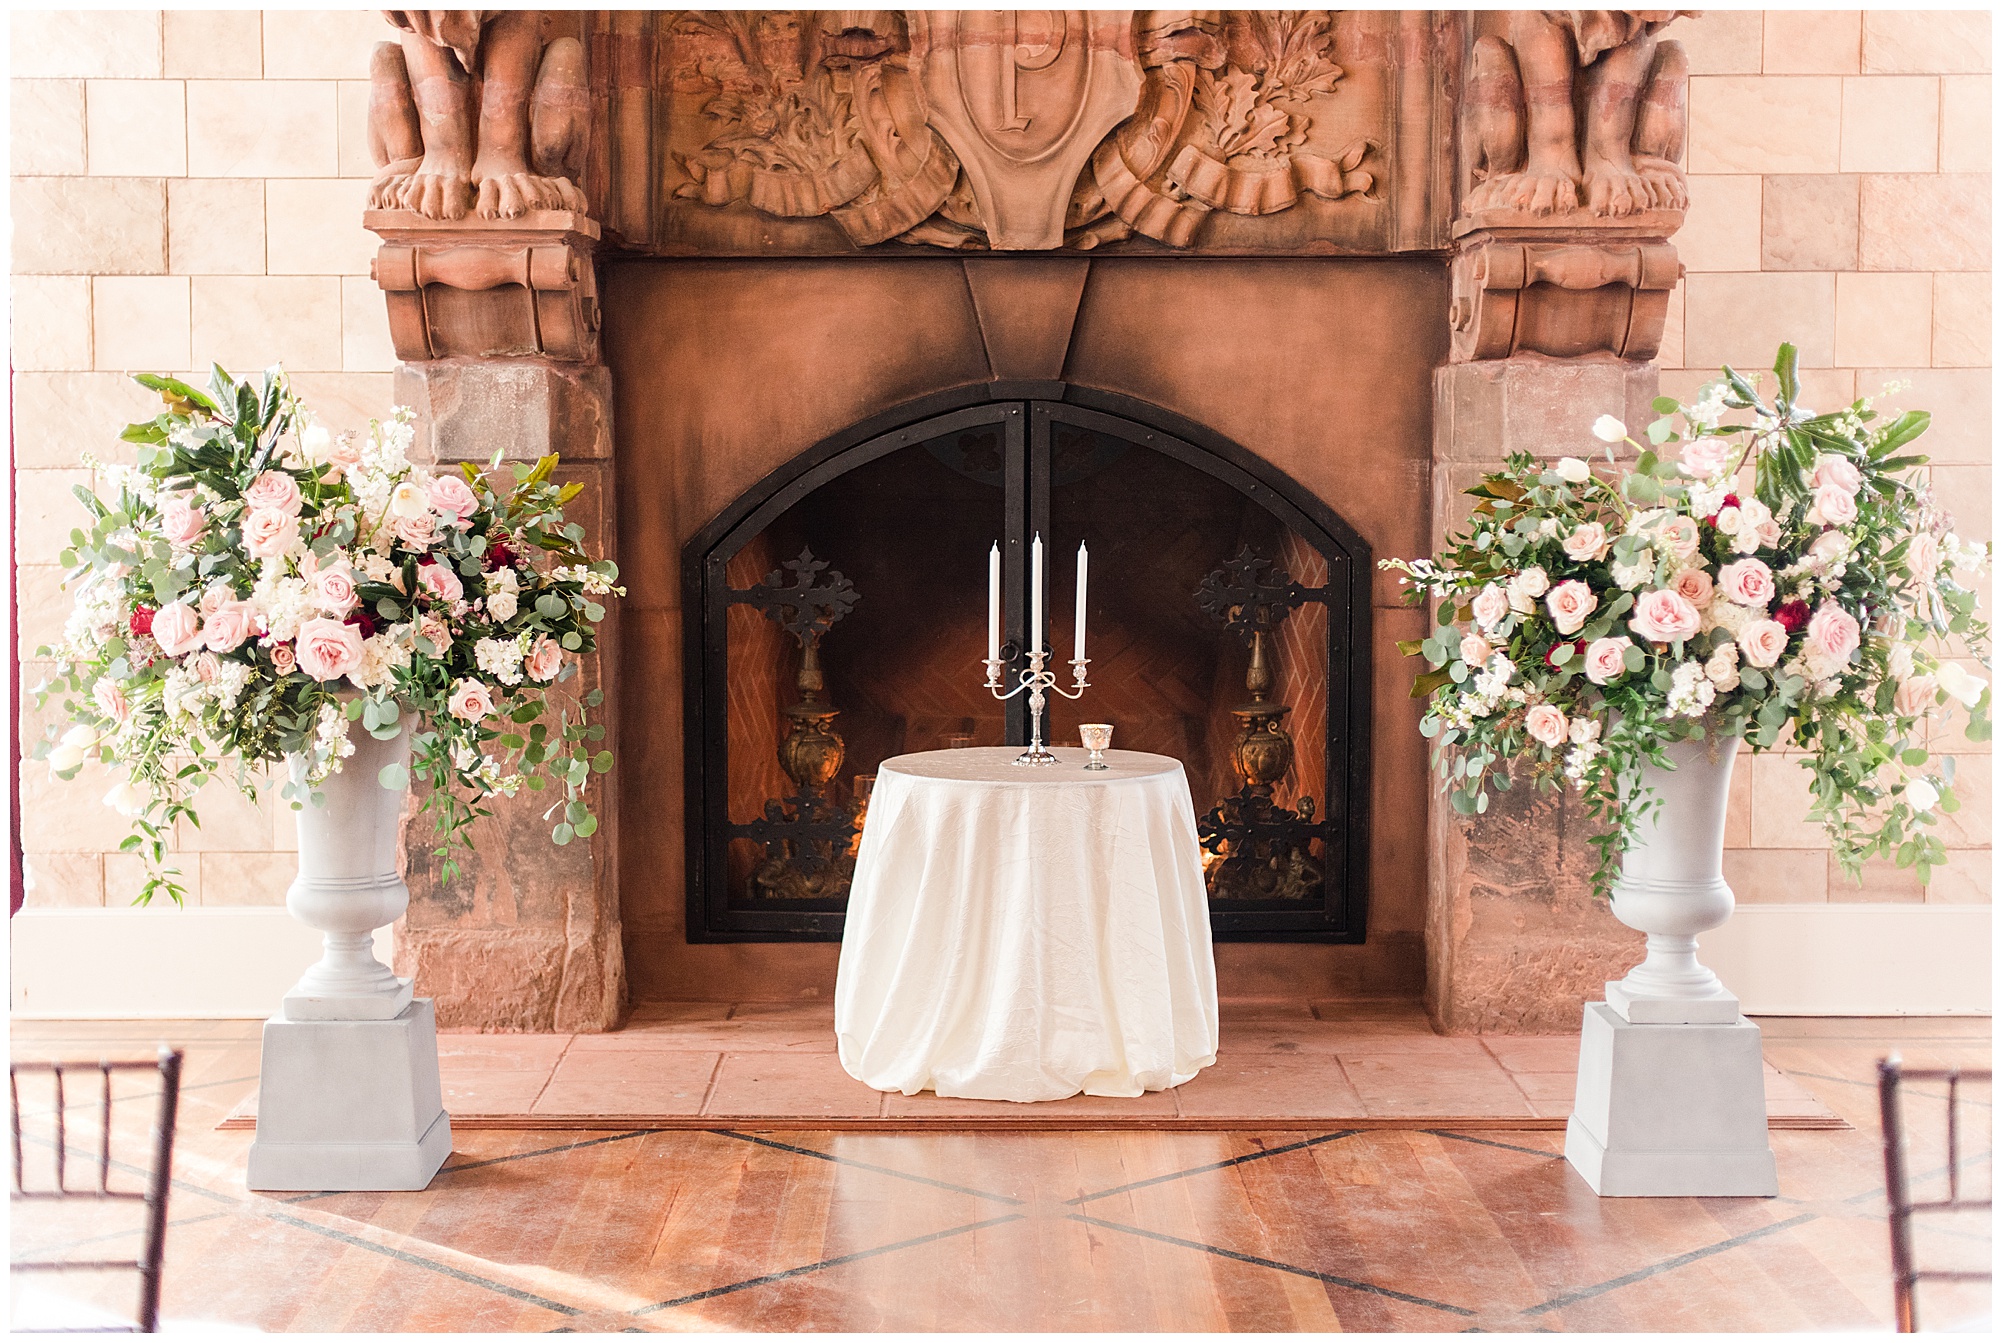 romantic dover hall wedding in january. by richmond rva wedding photographer, sarah & dave photography. classic wedding theme. fairytale inspired. disney inspired at dover hall estate.